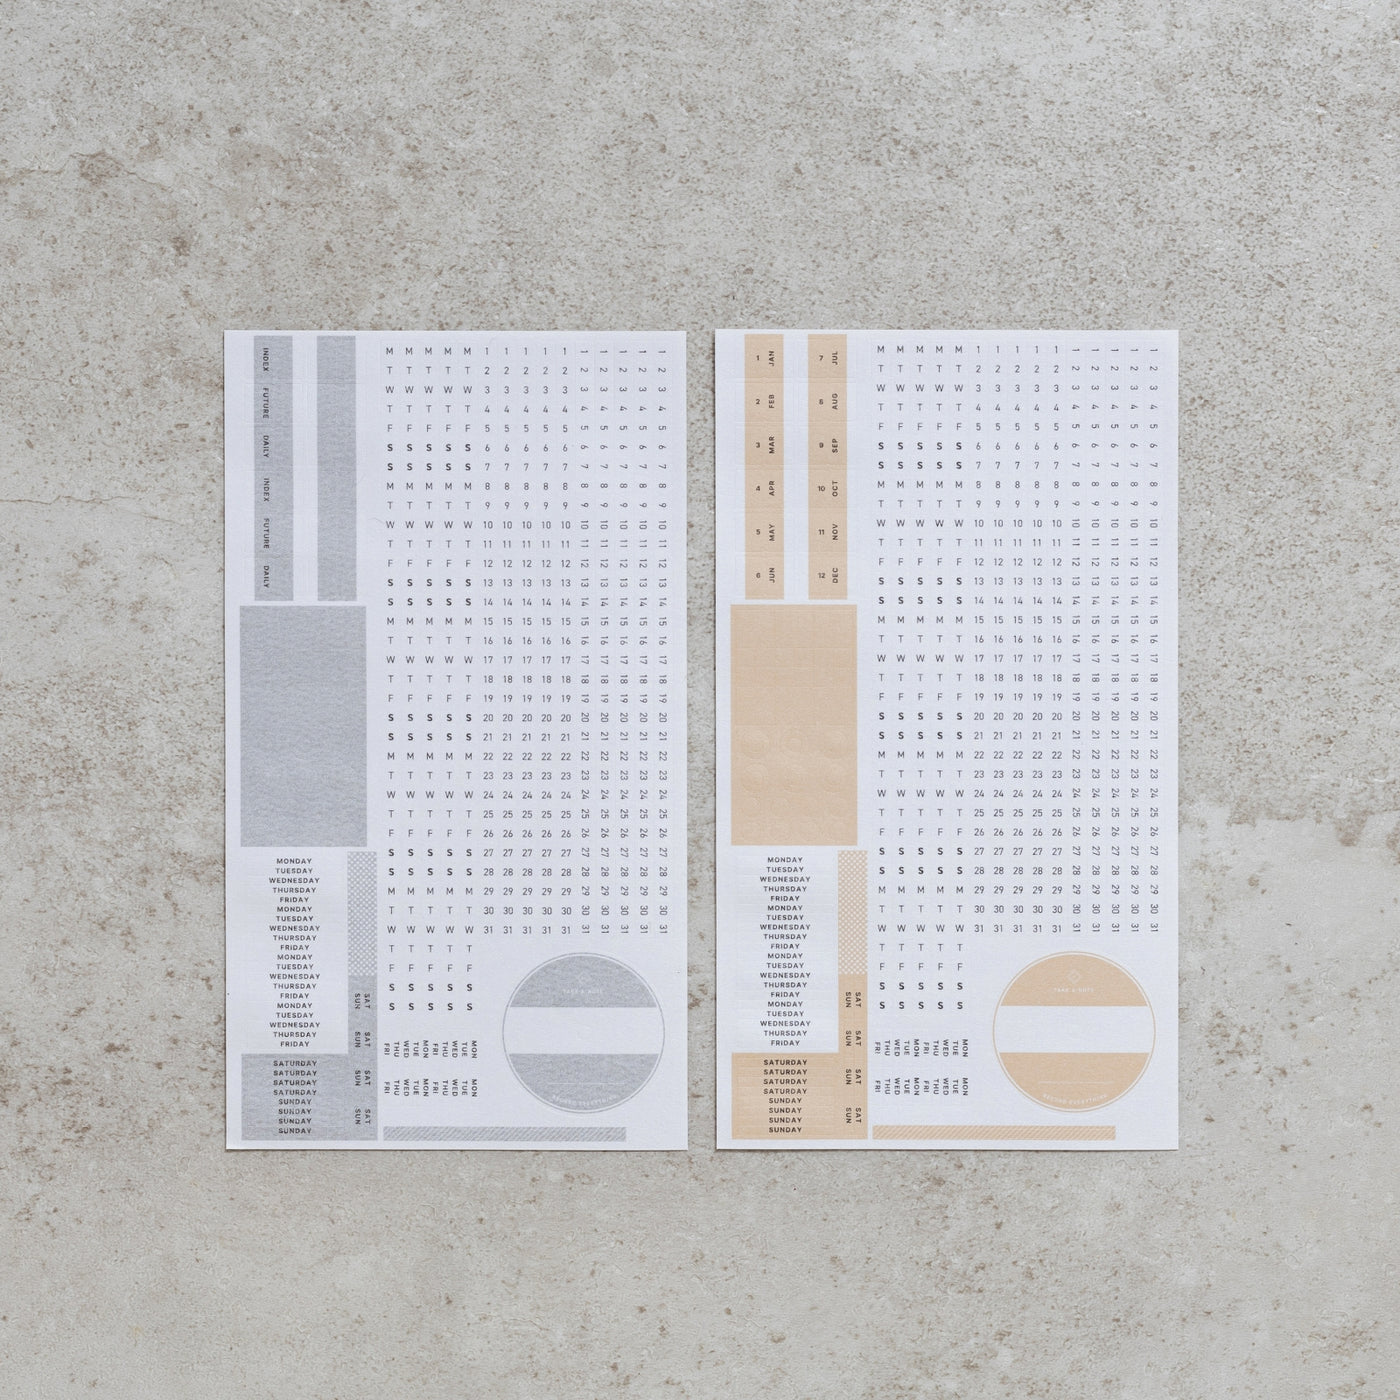 Take a Note "RECORD" - CALENDAR, MONTHLY DAILY BULLET JOURNAL WASHI STICKERS (2 sheets)